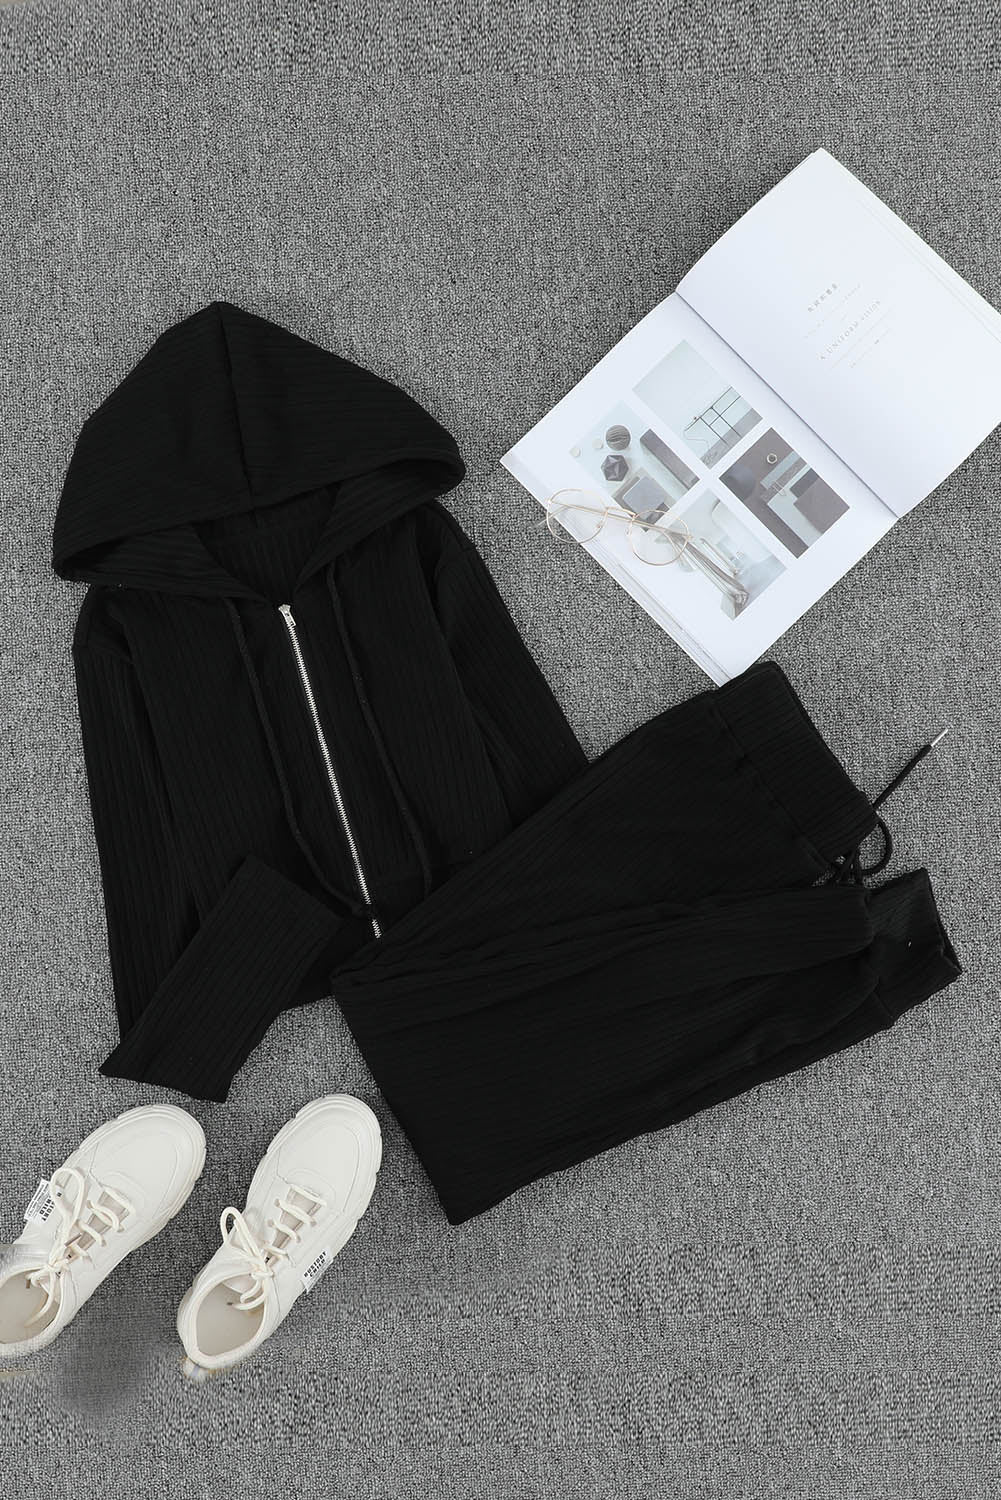 Ribbed Knit Cropped Hoodie And Jogger Two Piece Set